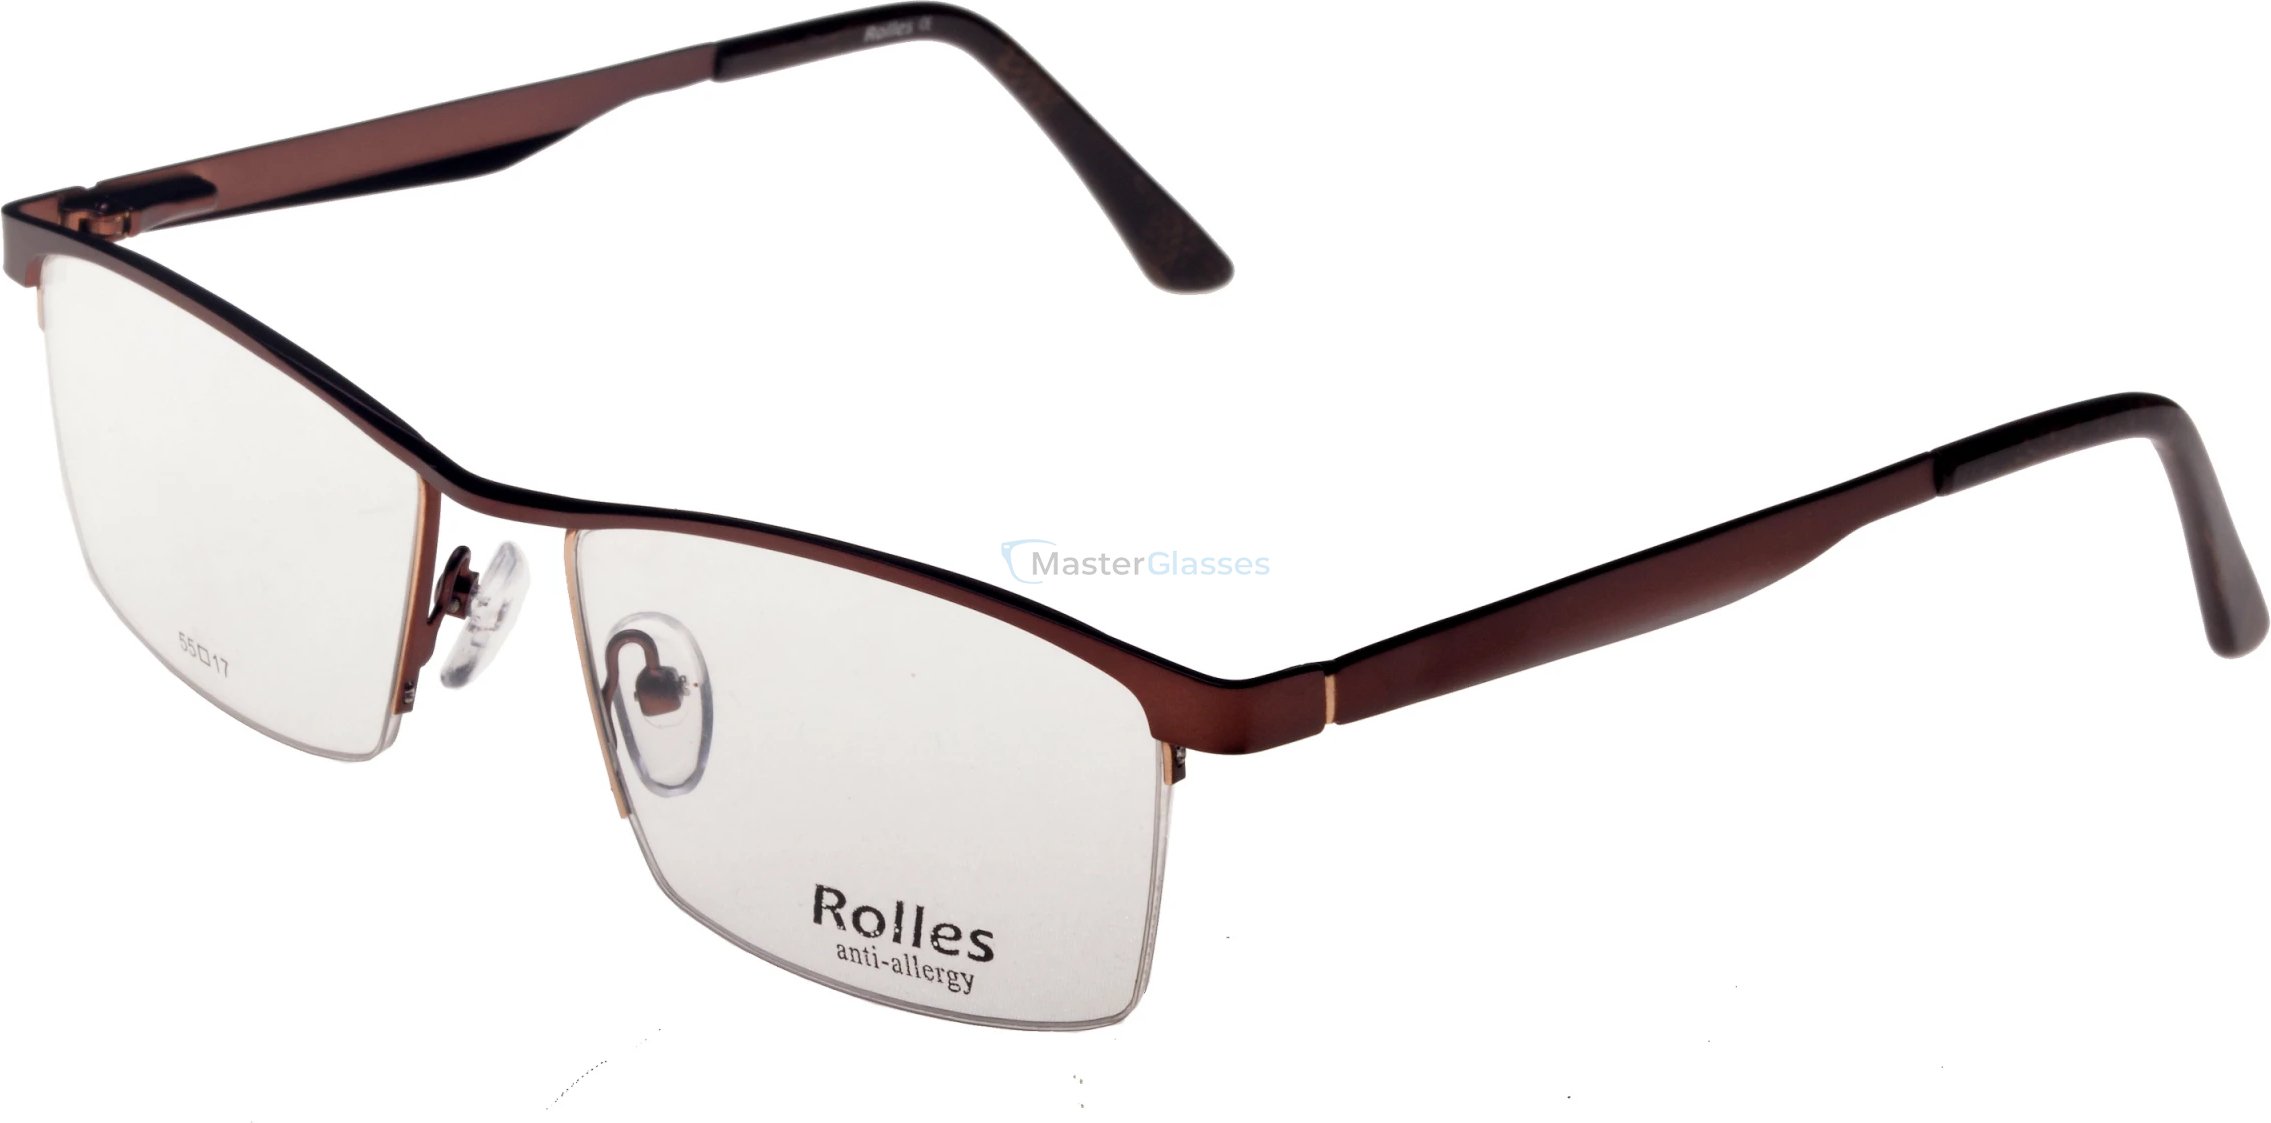  Rolles 585 01